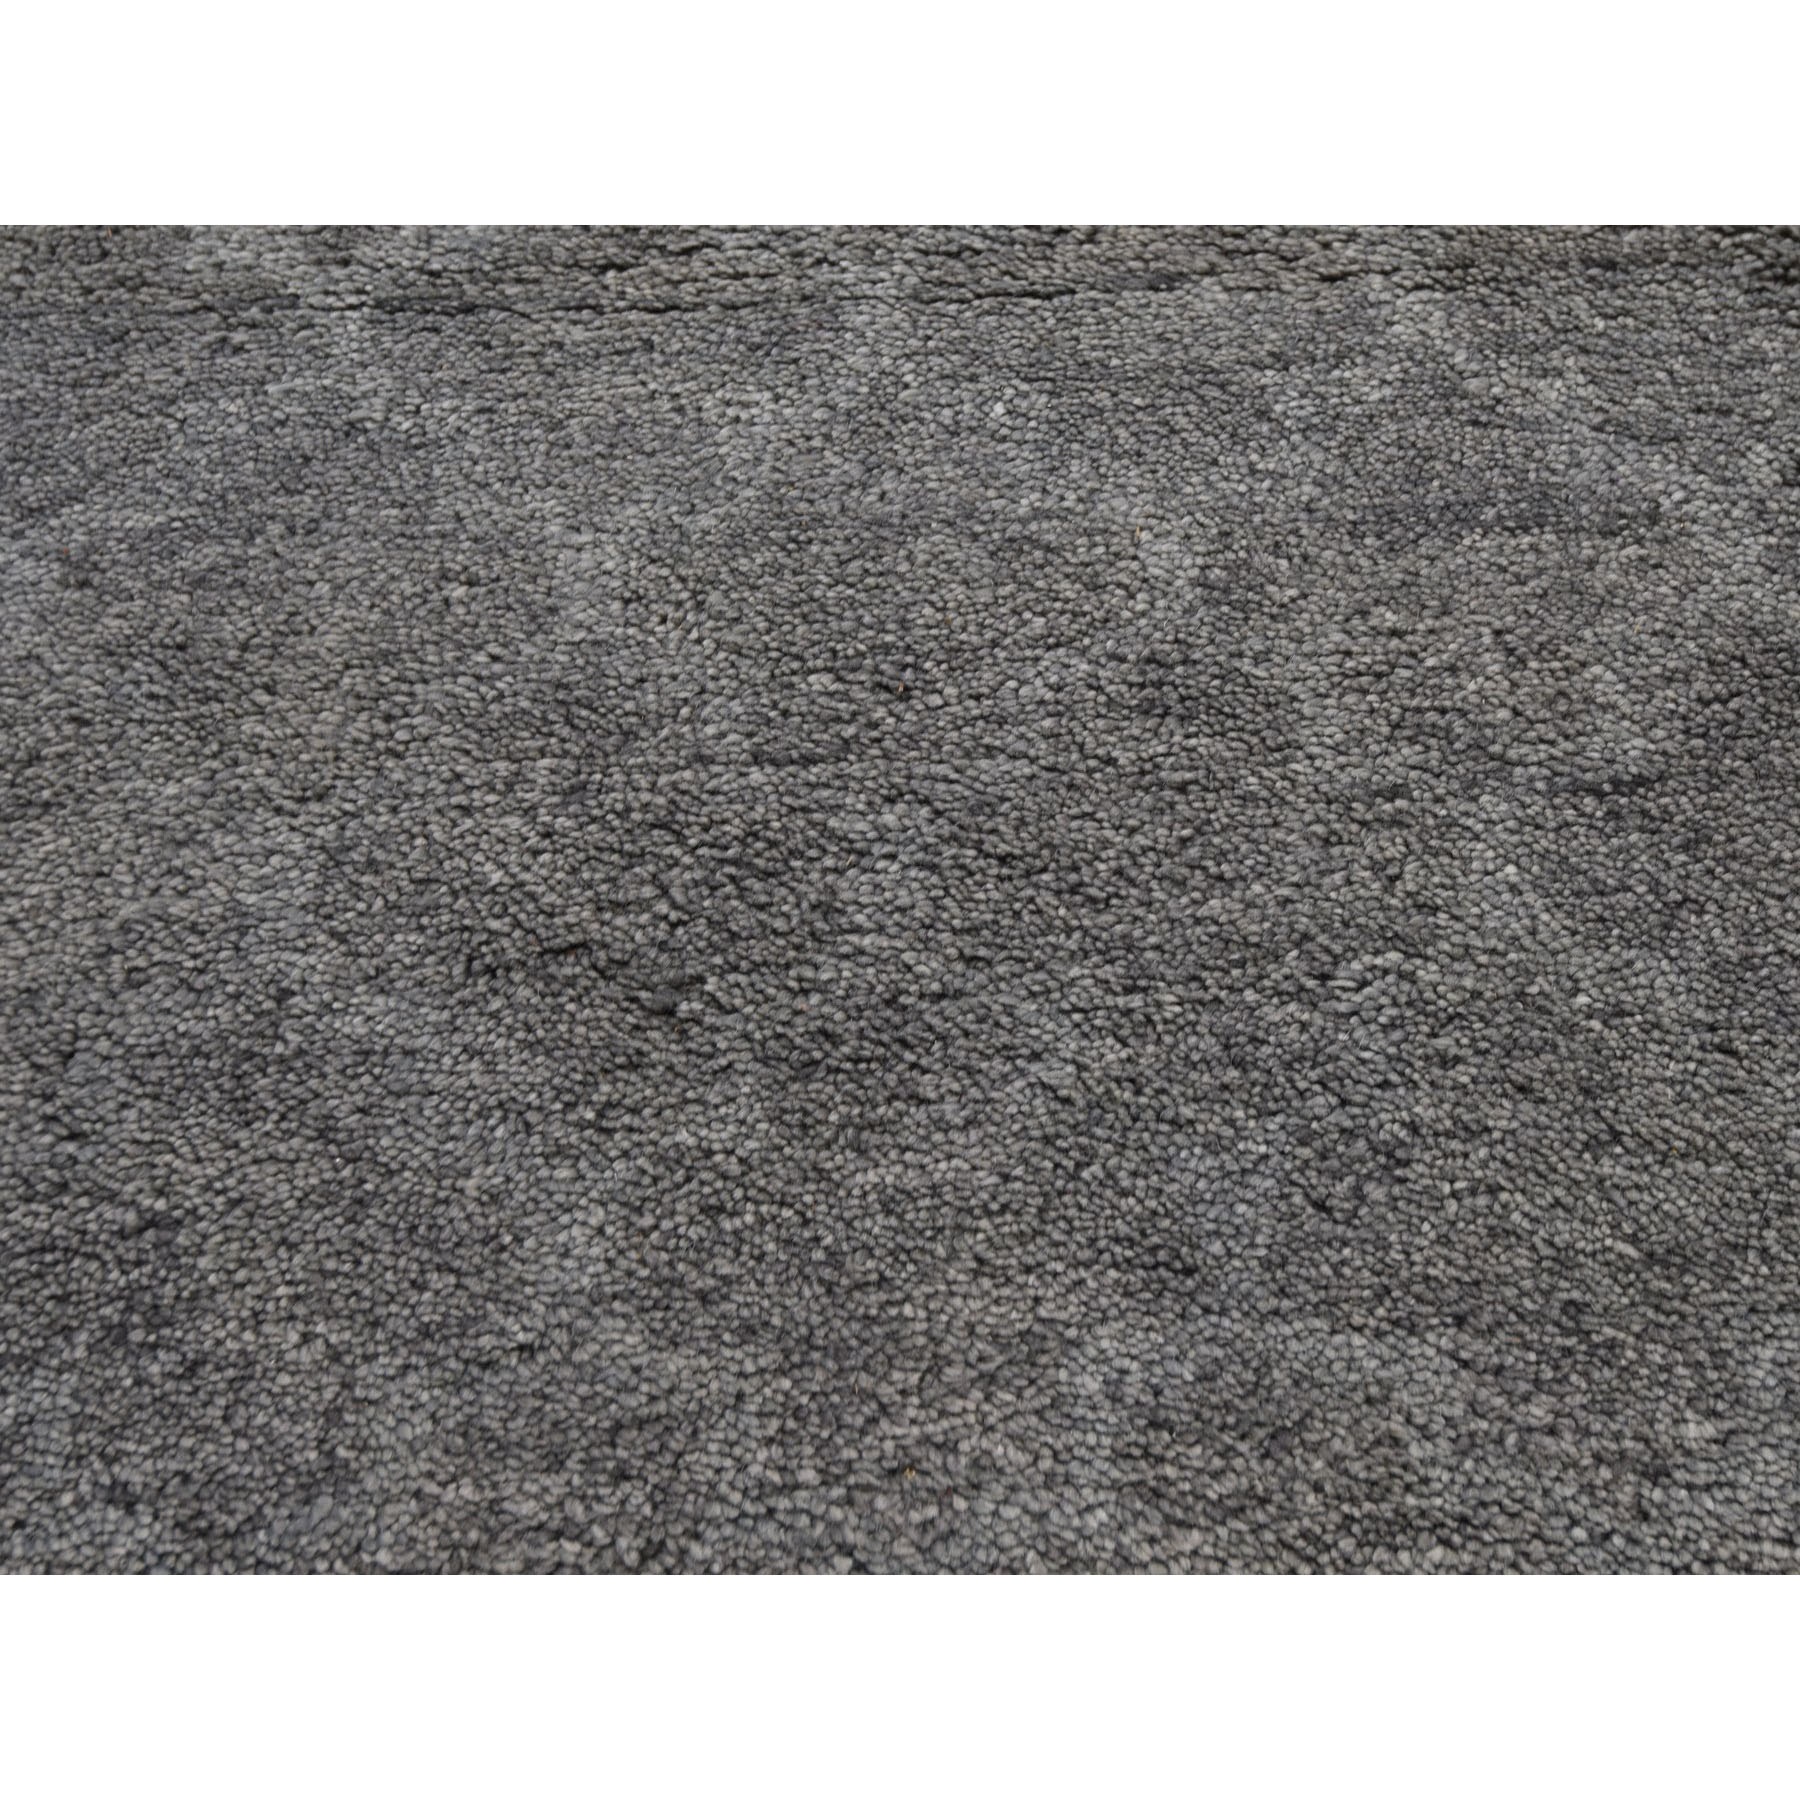 10-x14- Hand Knotted Pure Wool Grey Moroccan Berber Thick and Plush Oriental Rug 